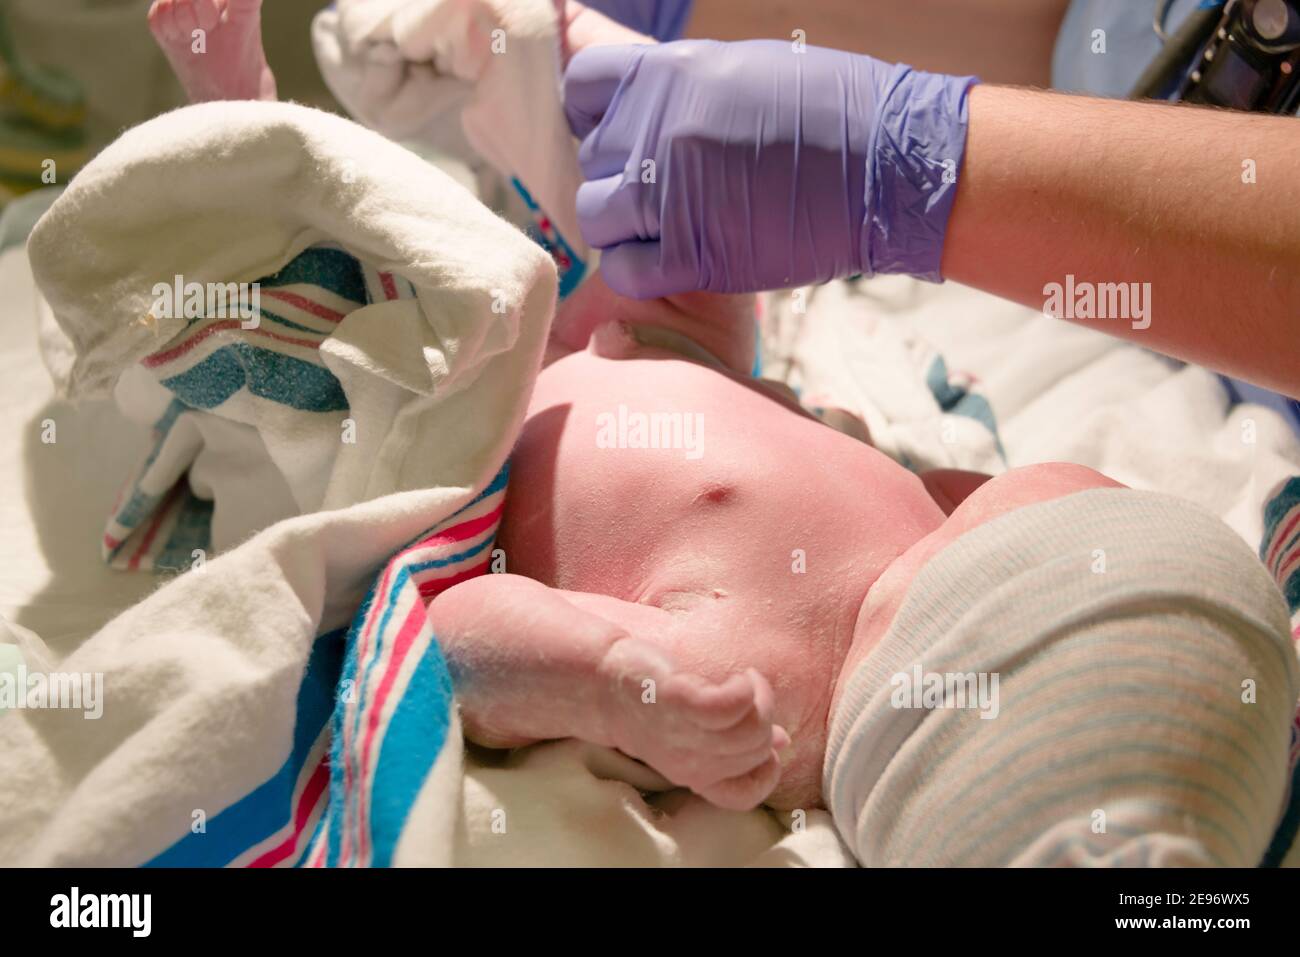 Nurse cleaning newborn baby girl in hospital delivery room. Stock Photo